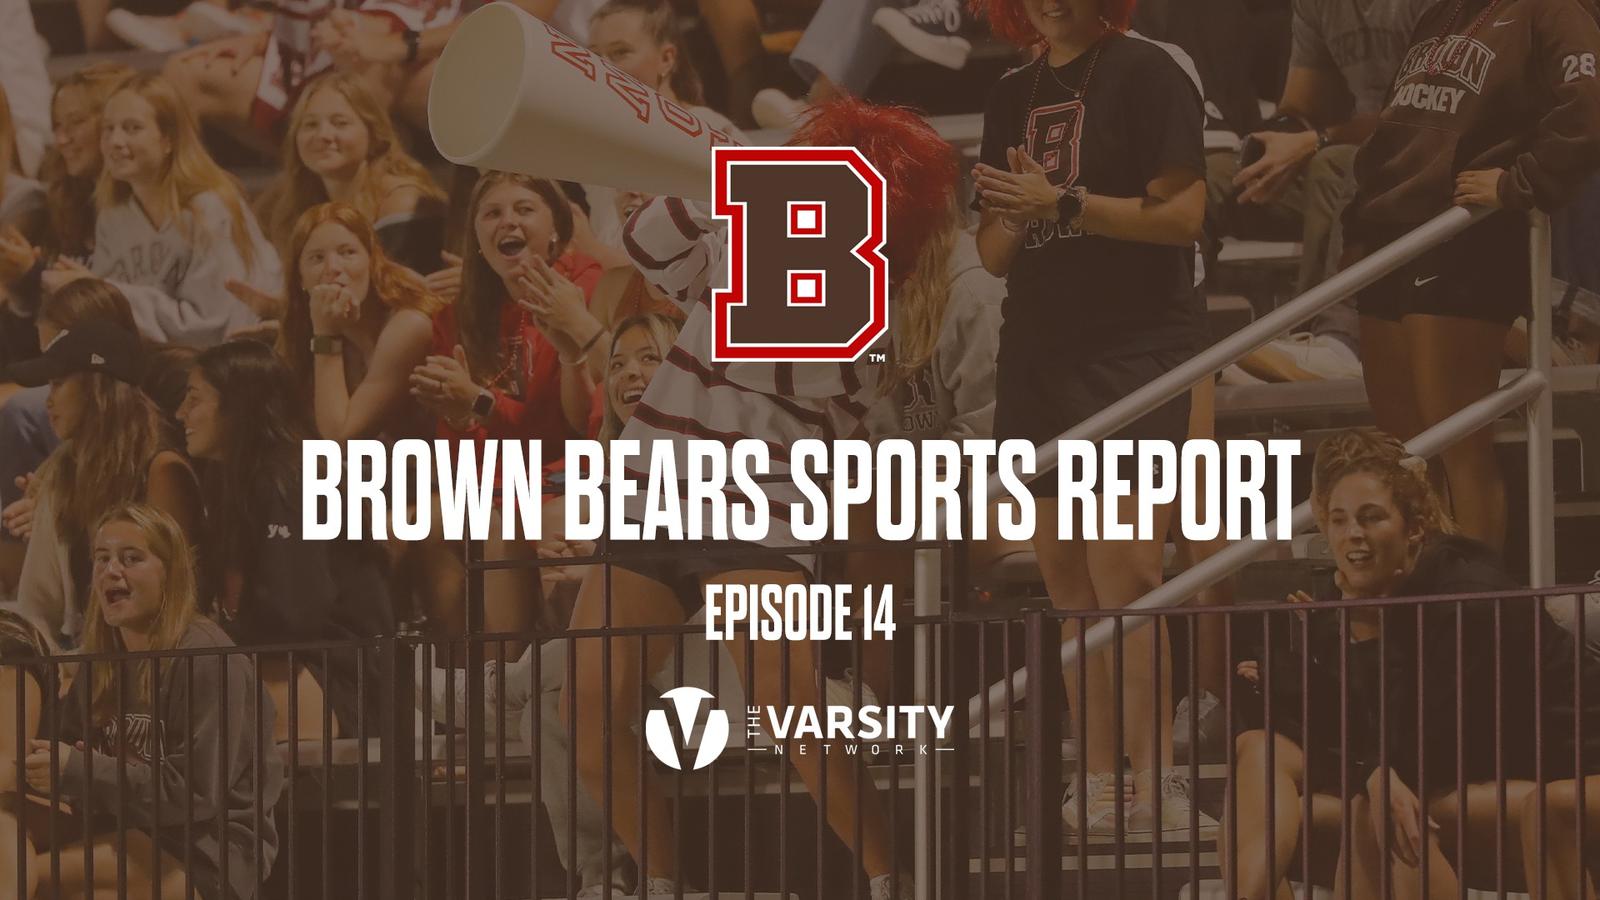 Brown University’s Sports Foundation: Enhancing the Student-Athlete Experience Through Donations